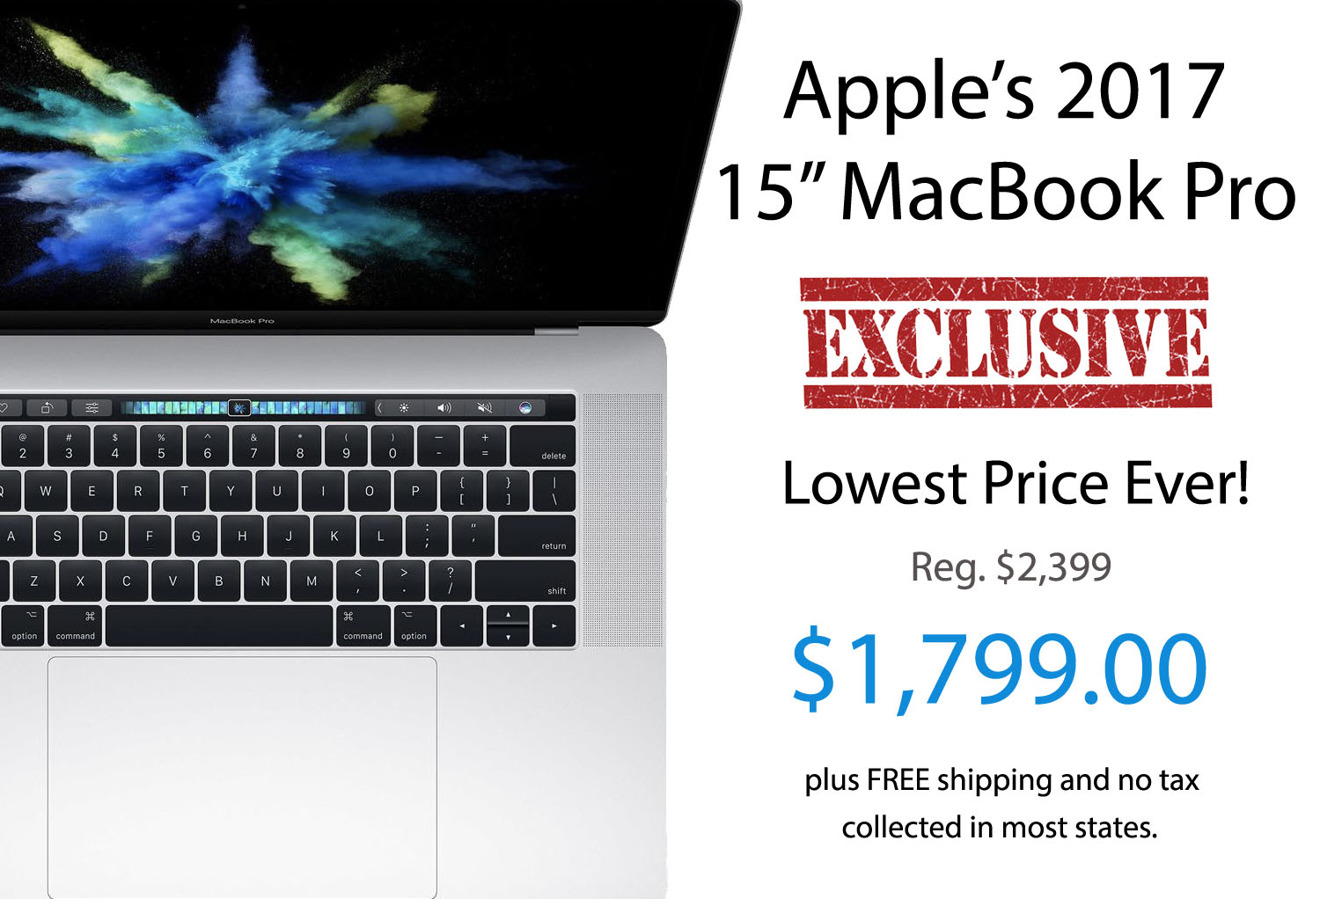 Apple 15 inch MacBook Pro with TouchBar lowest price ever